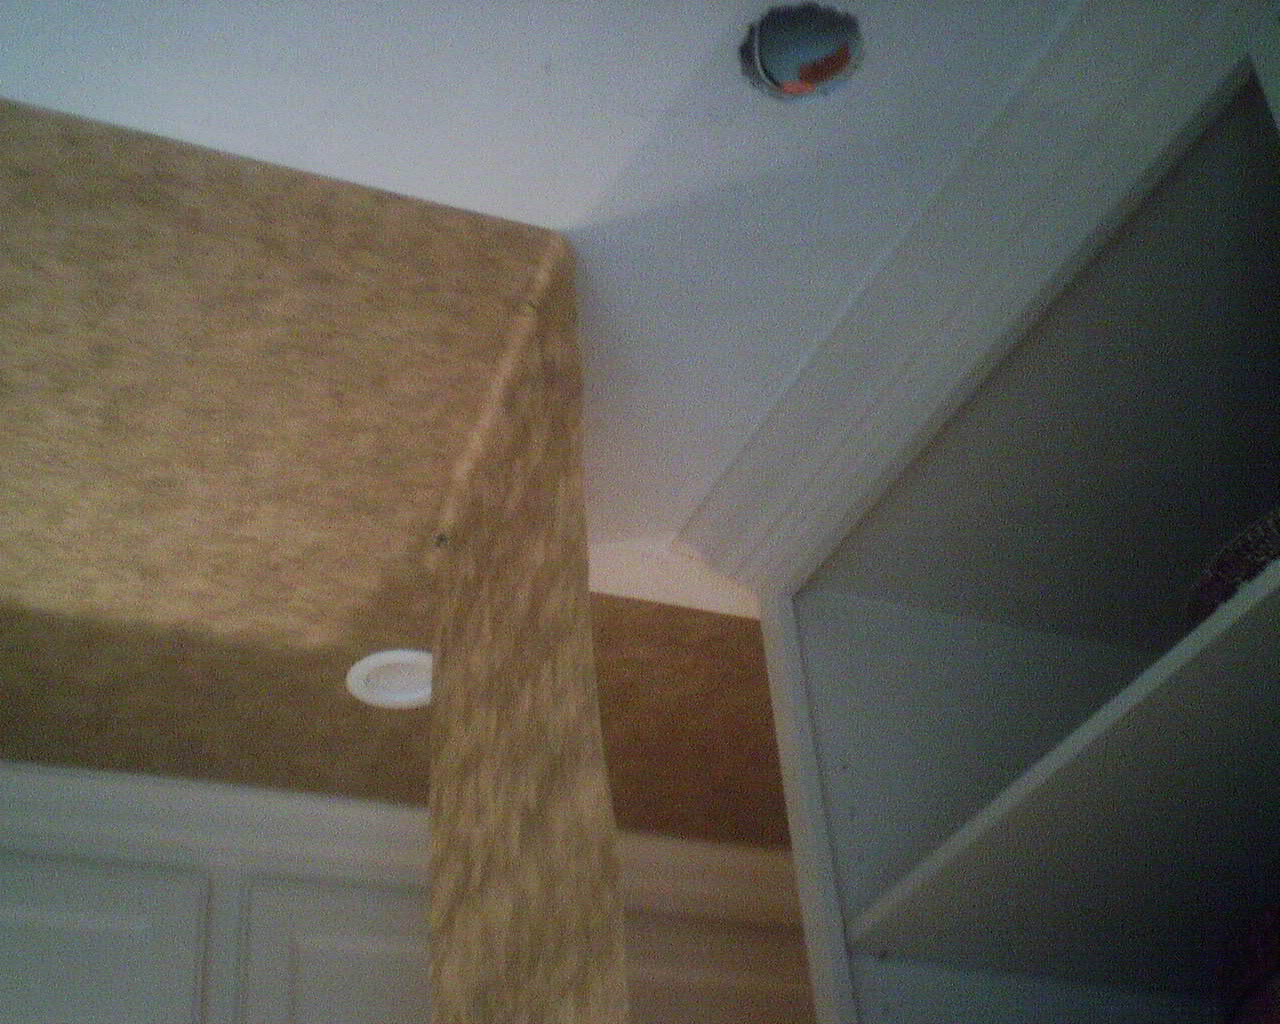 Wallpapering A Ceiling With Just One Person Wallpaperlady S